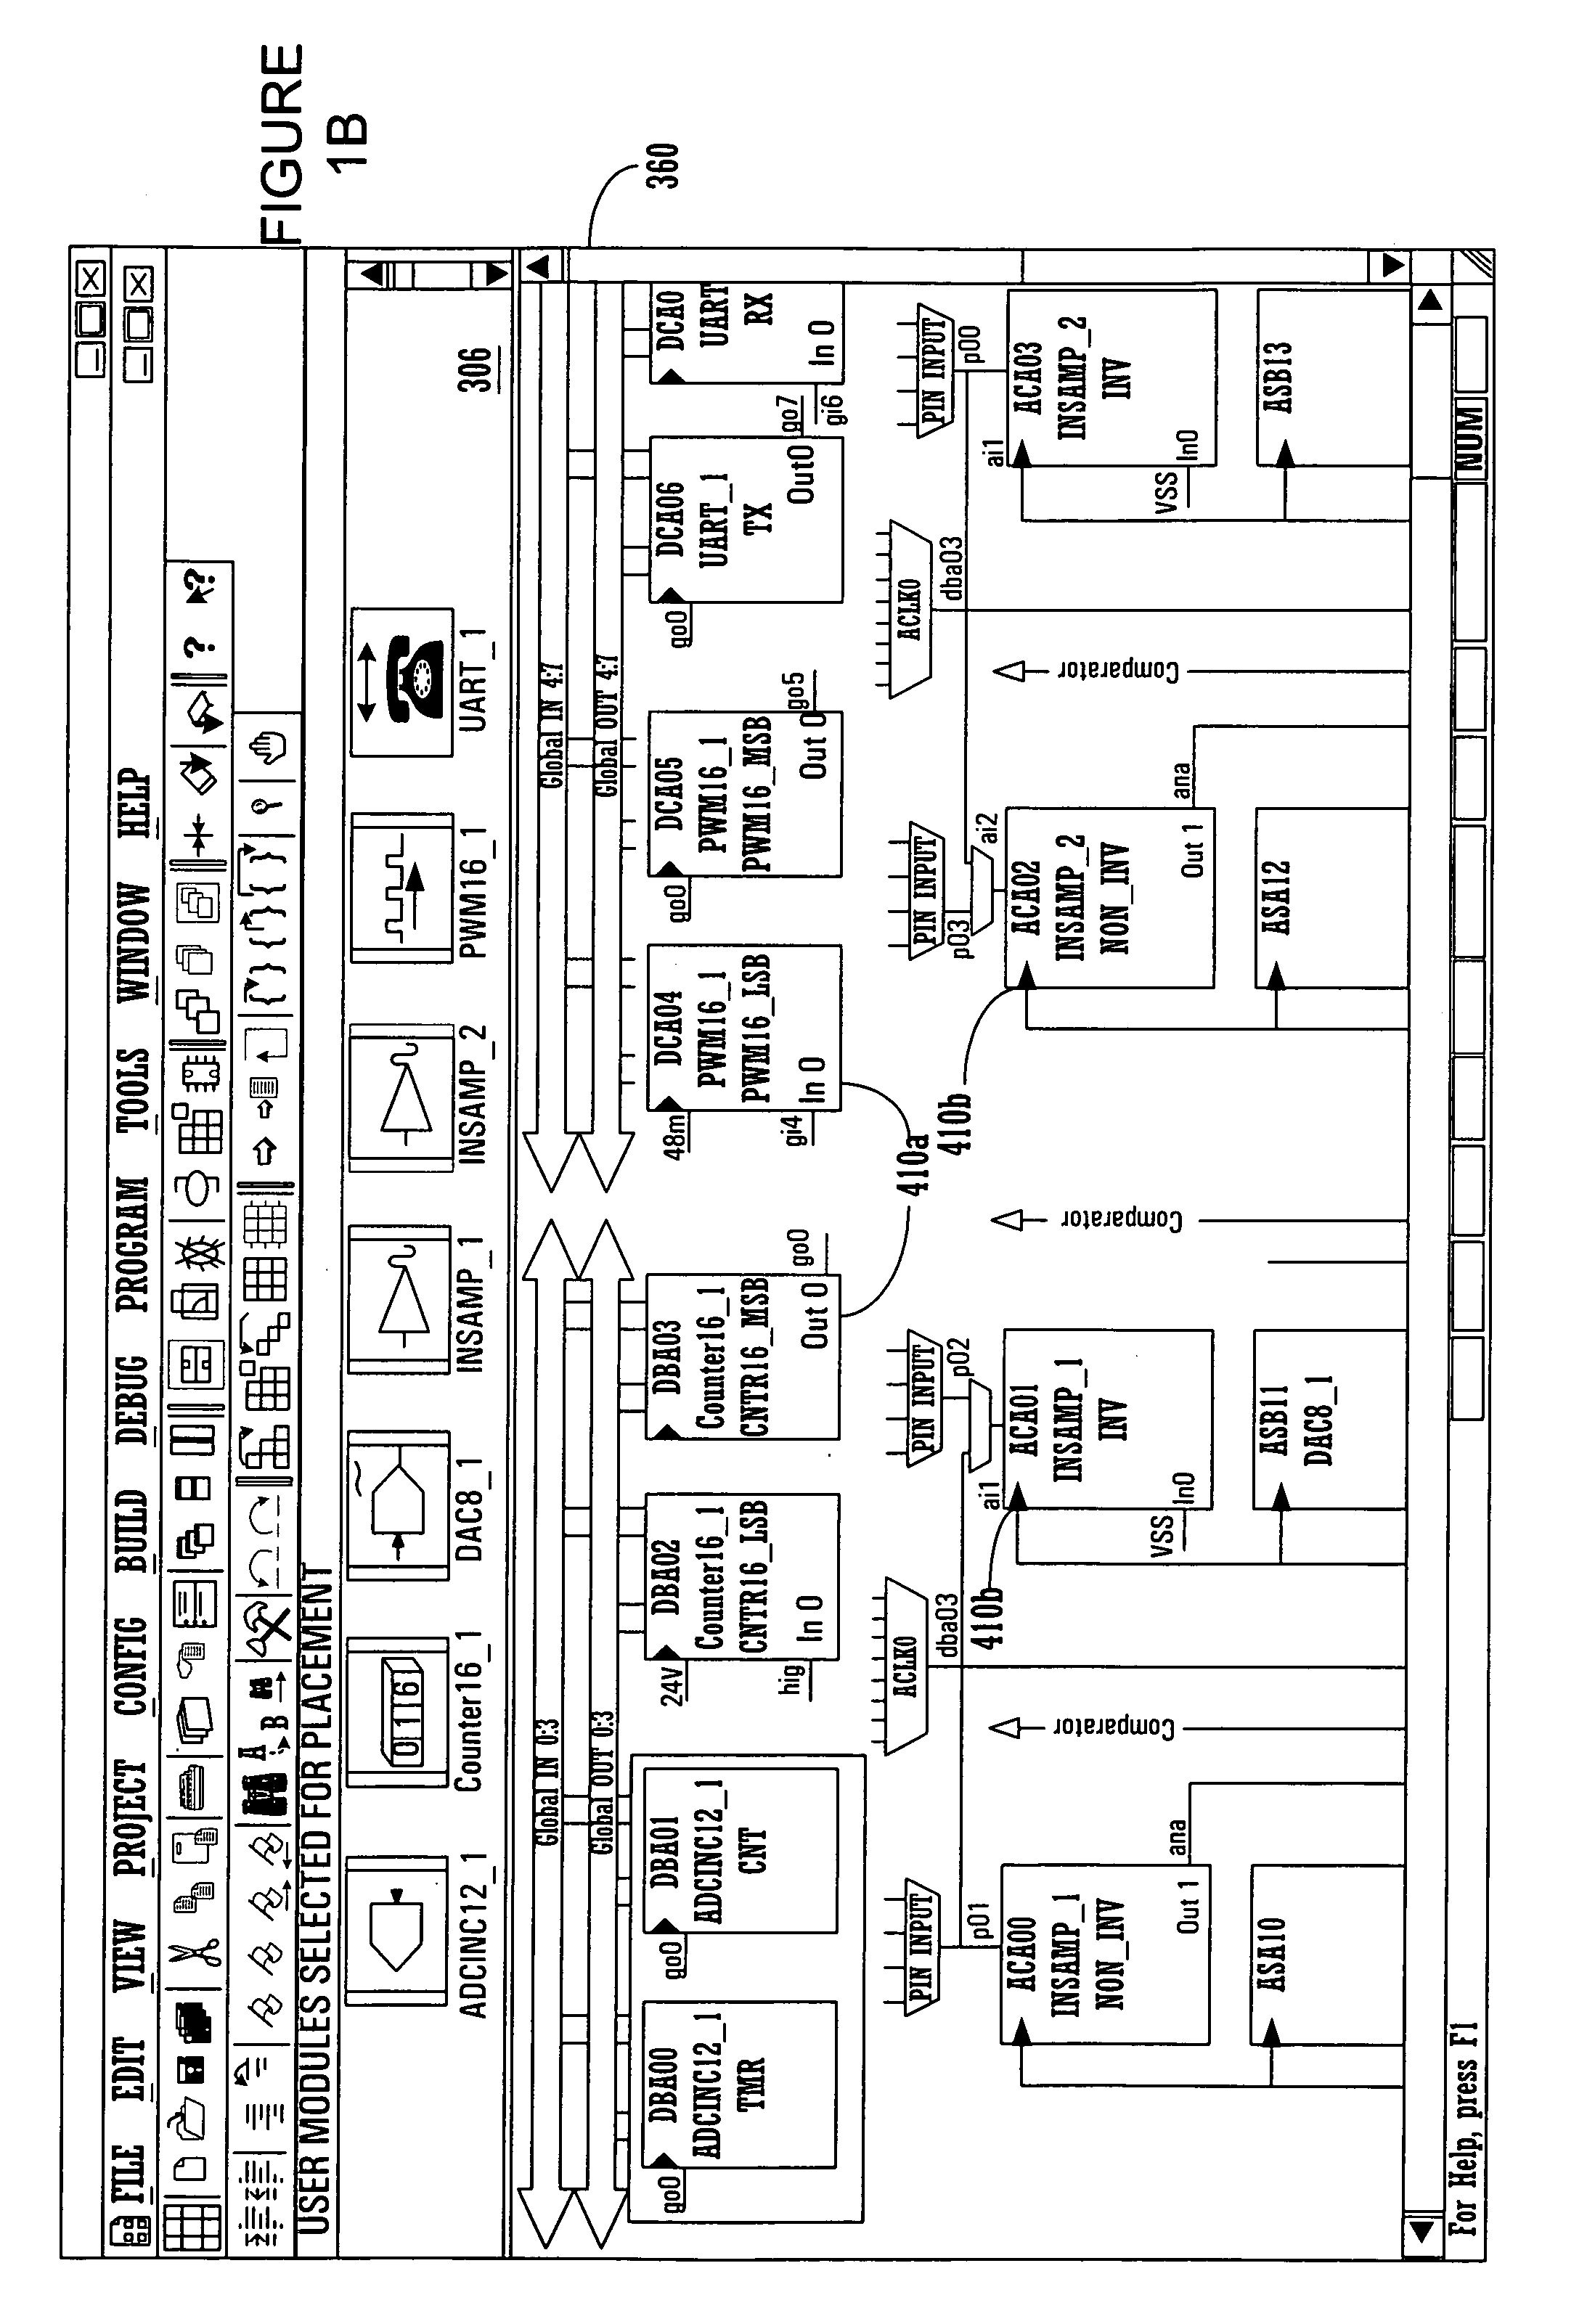 Automatic generation of application program interfaces, source code, interrupts, and datasheets for microcontroller programming